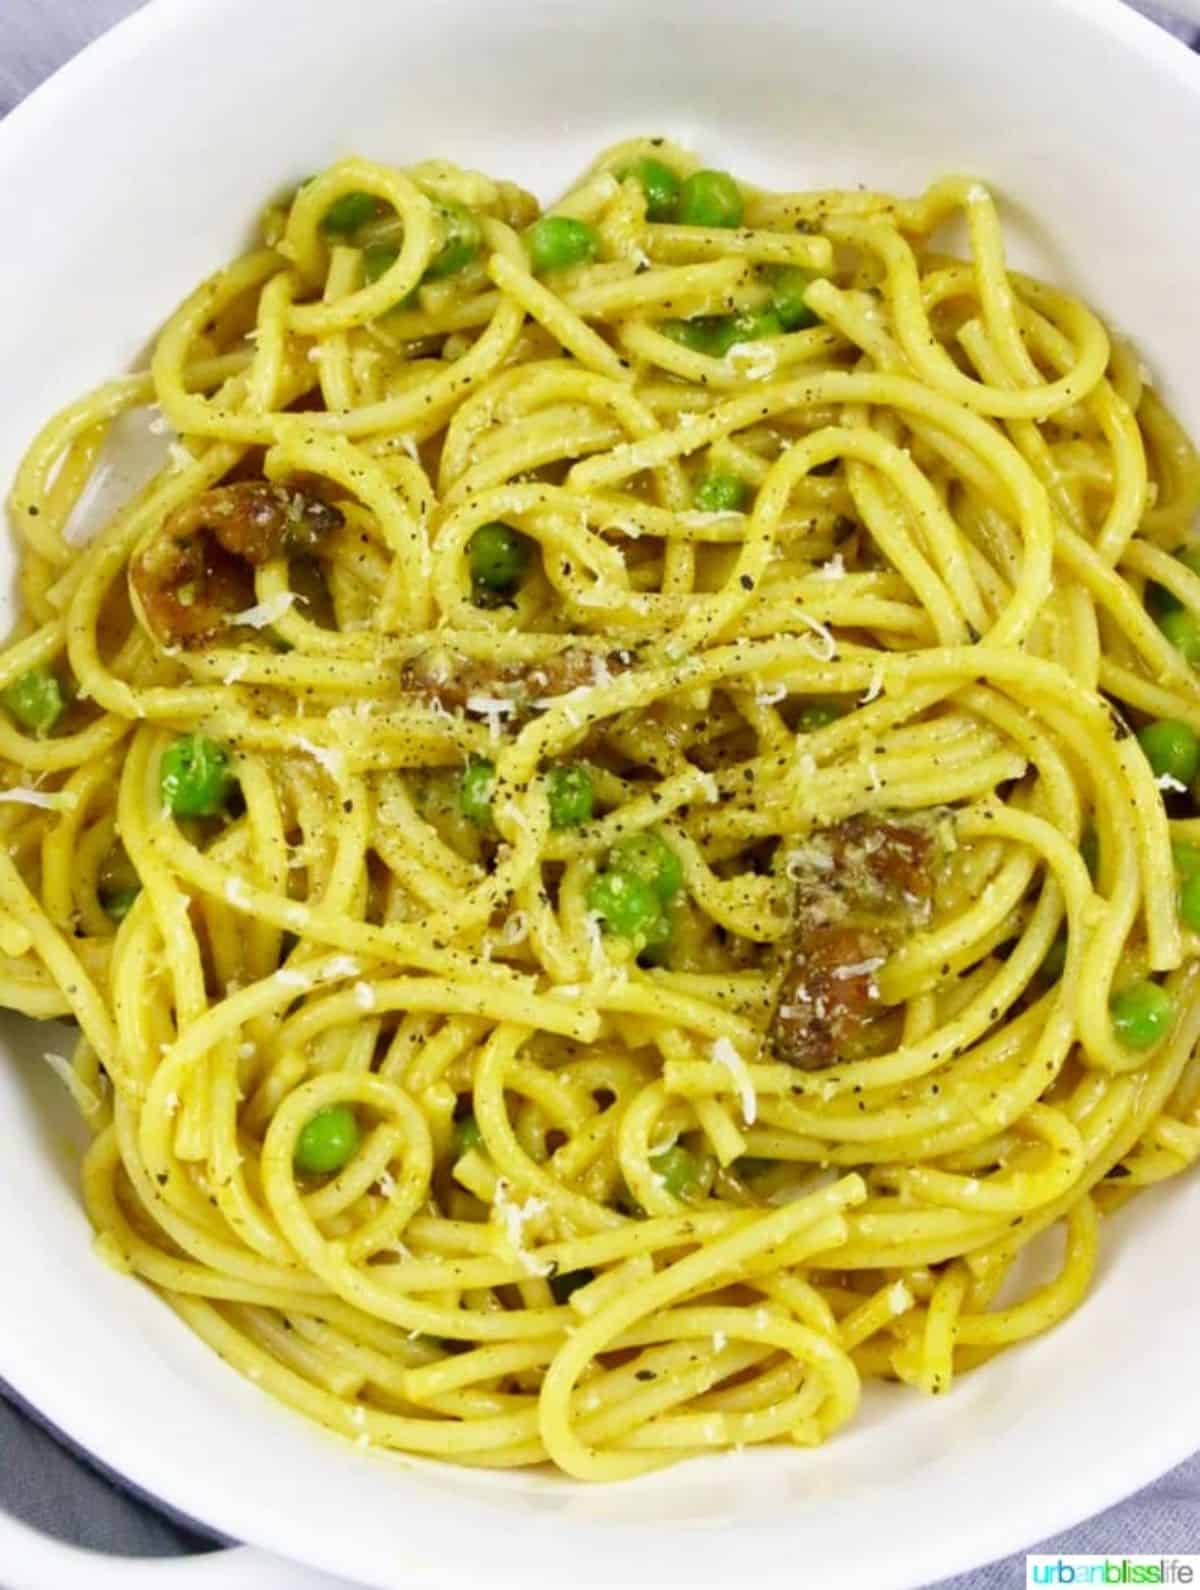 Bacon Turmeric Pasta With Peas on a white plate.